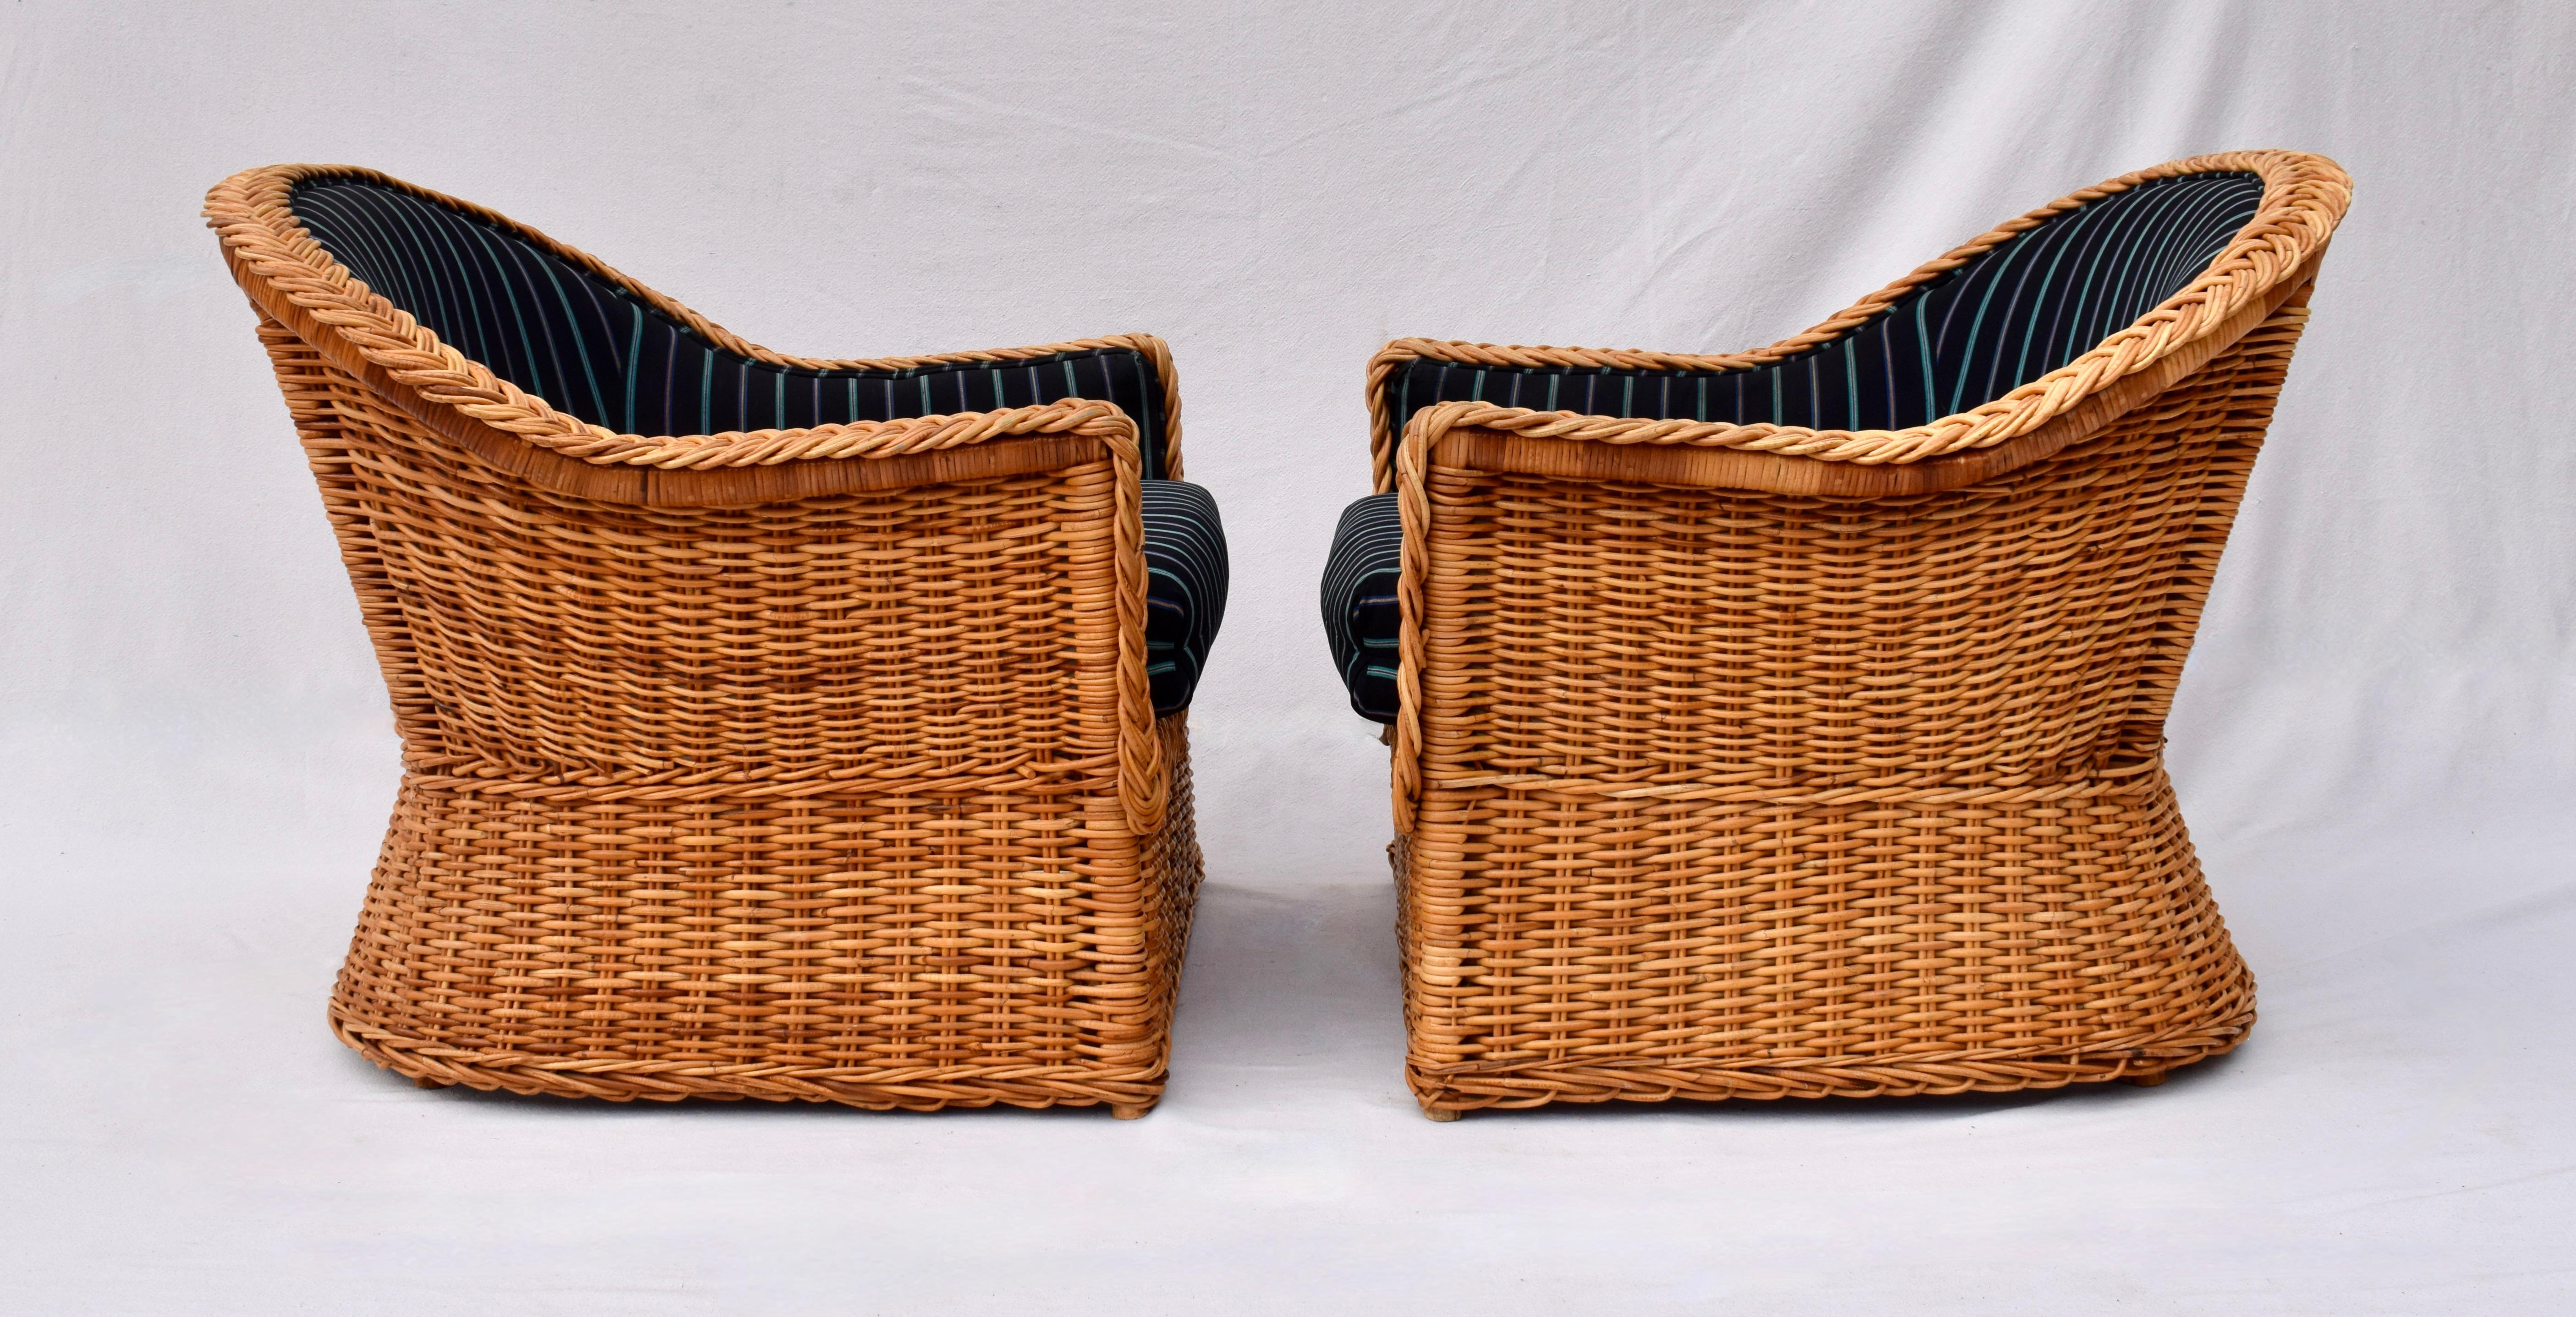 1980's Wicker Works Braided Rattan Club Chairs, Pair In Good Condition For Sale In Southampton, NJ